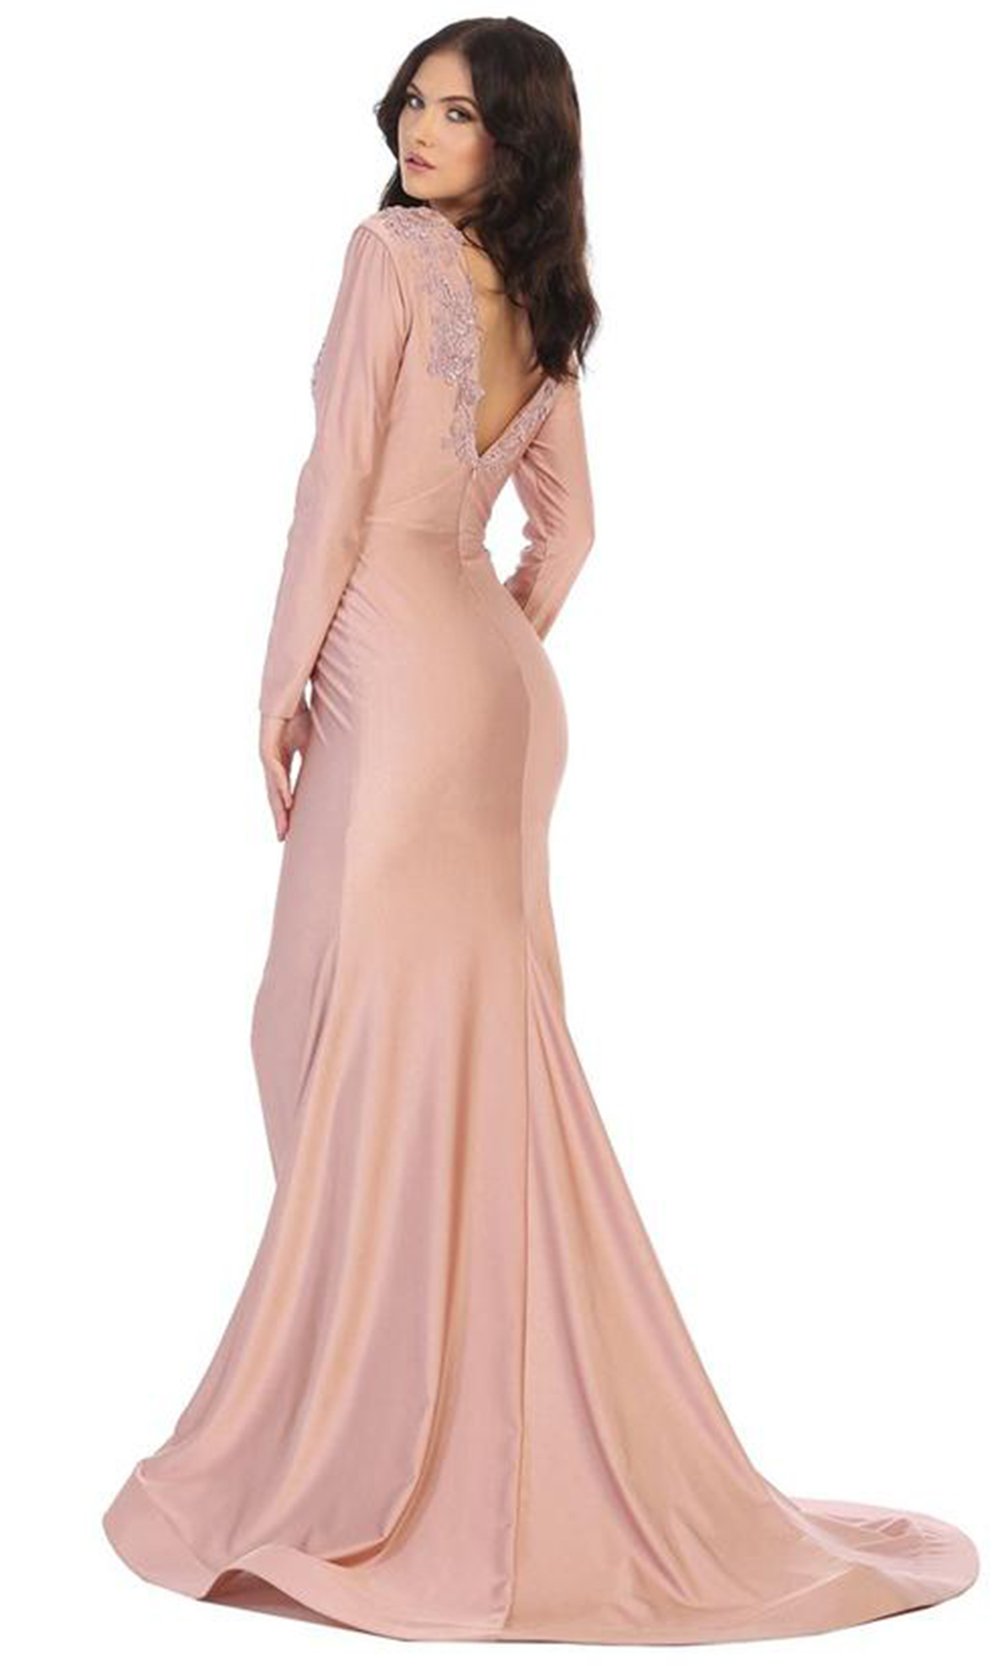 May Queen - Long Sleeve Beaded Applique Trumpet Gown MQ1772 In Pink